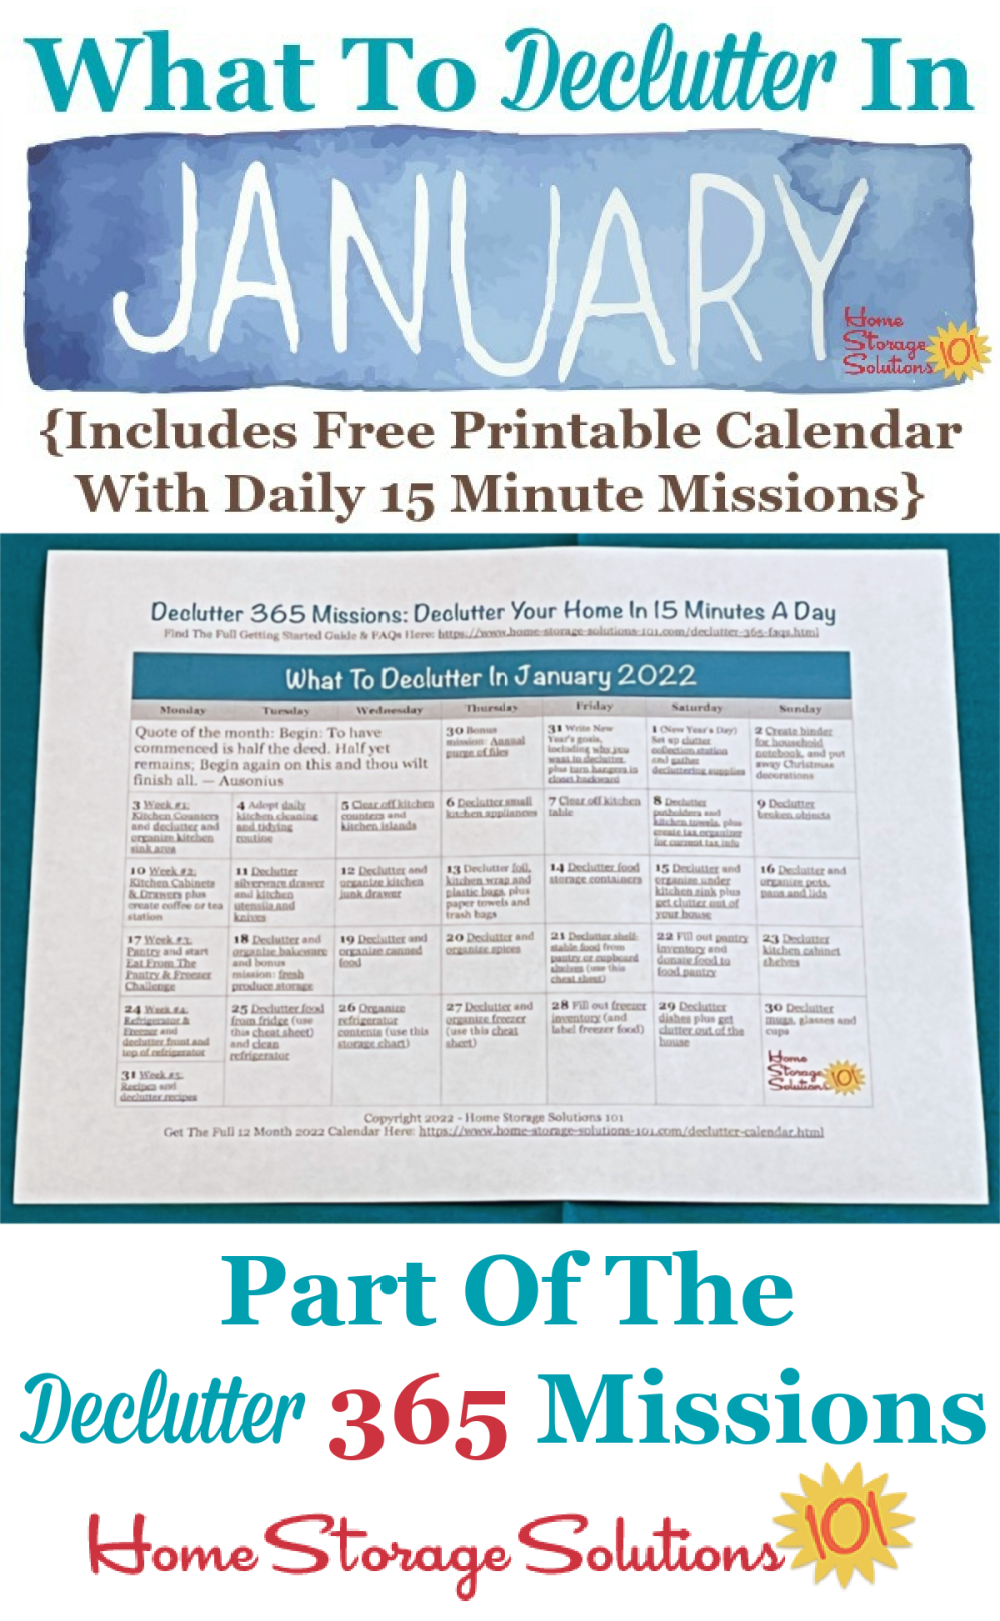 What to declutter in January 2022, including a free printable January decluttering calendar you can follow each day {on Home Storage Solutions 101} #Declutter365 #Decluttering #Declutter